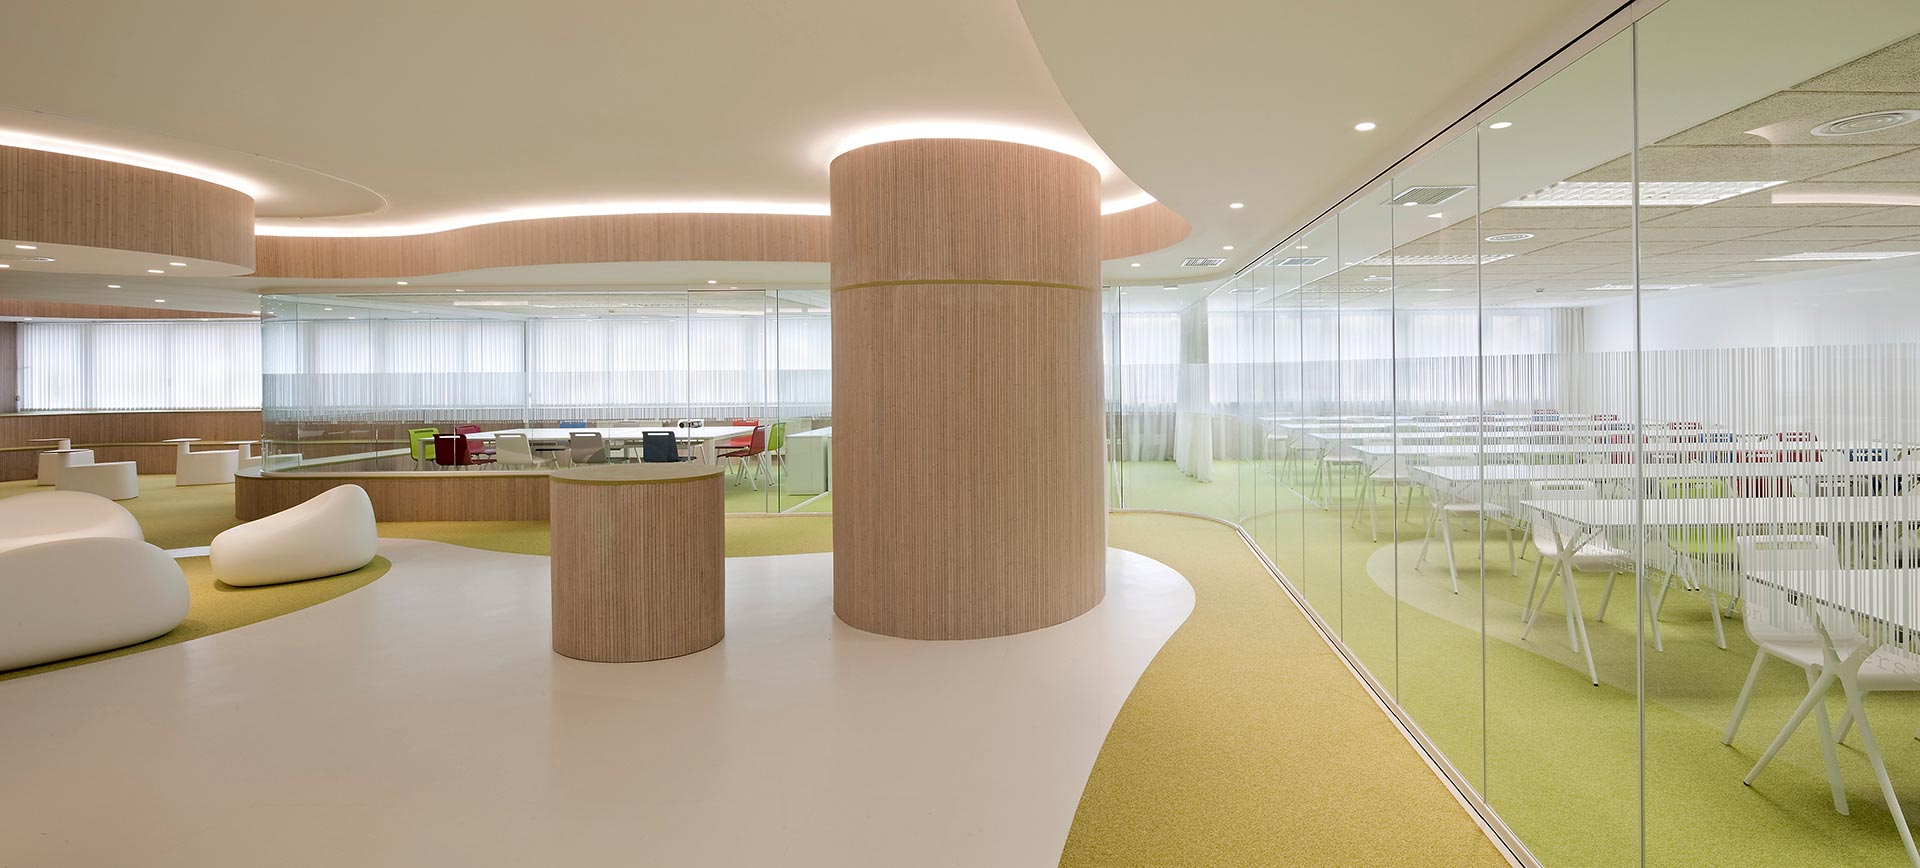 Organic spaces in modern office refurbishment of CISE designed by Moah Architects in Santander